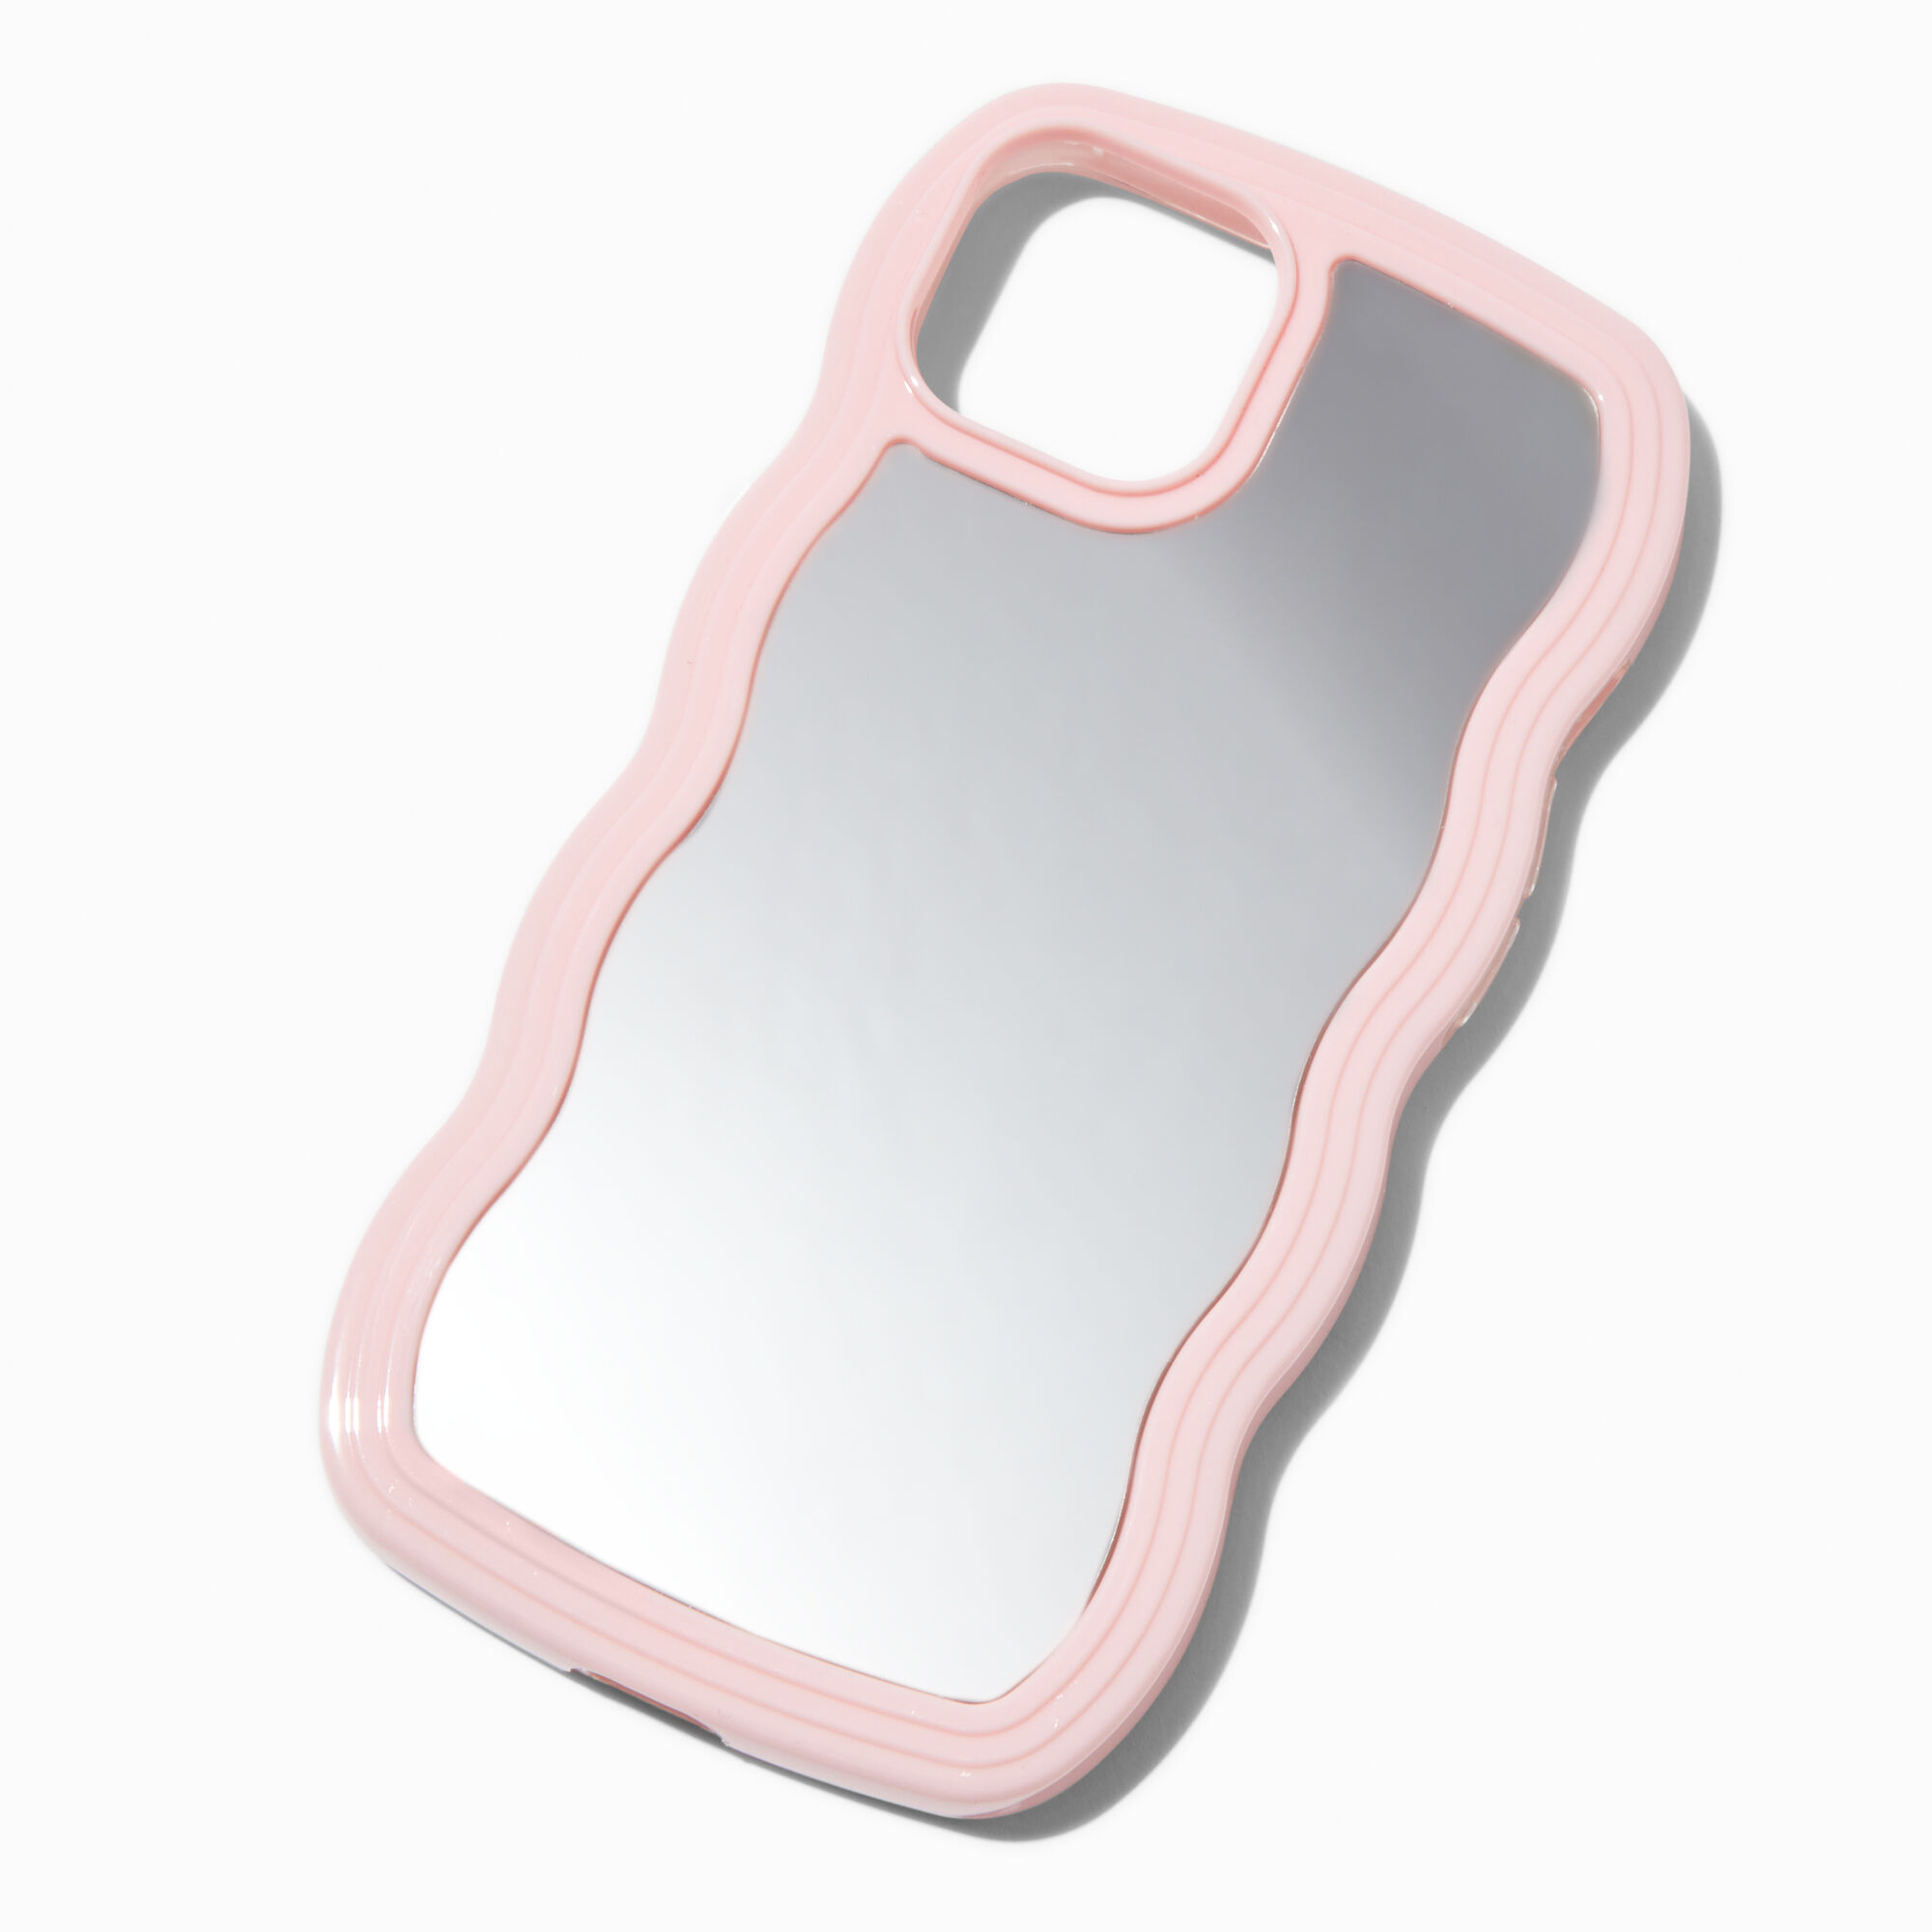 View Claires Trim Wavy Mirror Phone Case Fits Iphone 131415 Pink information